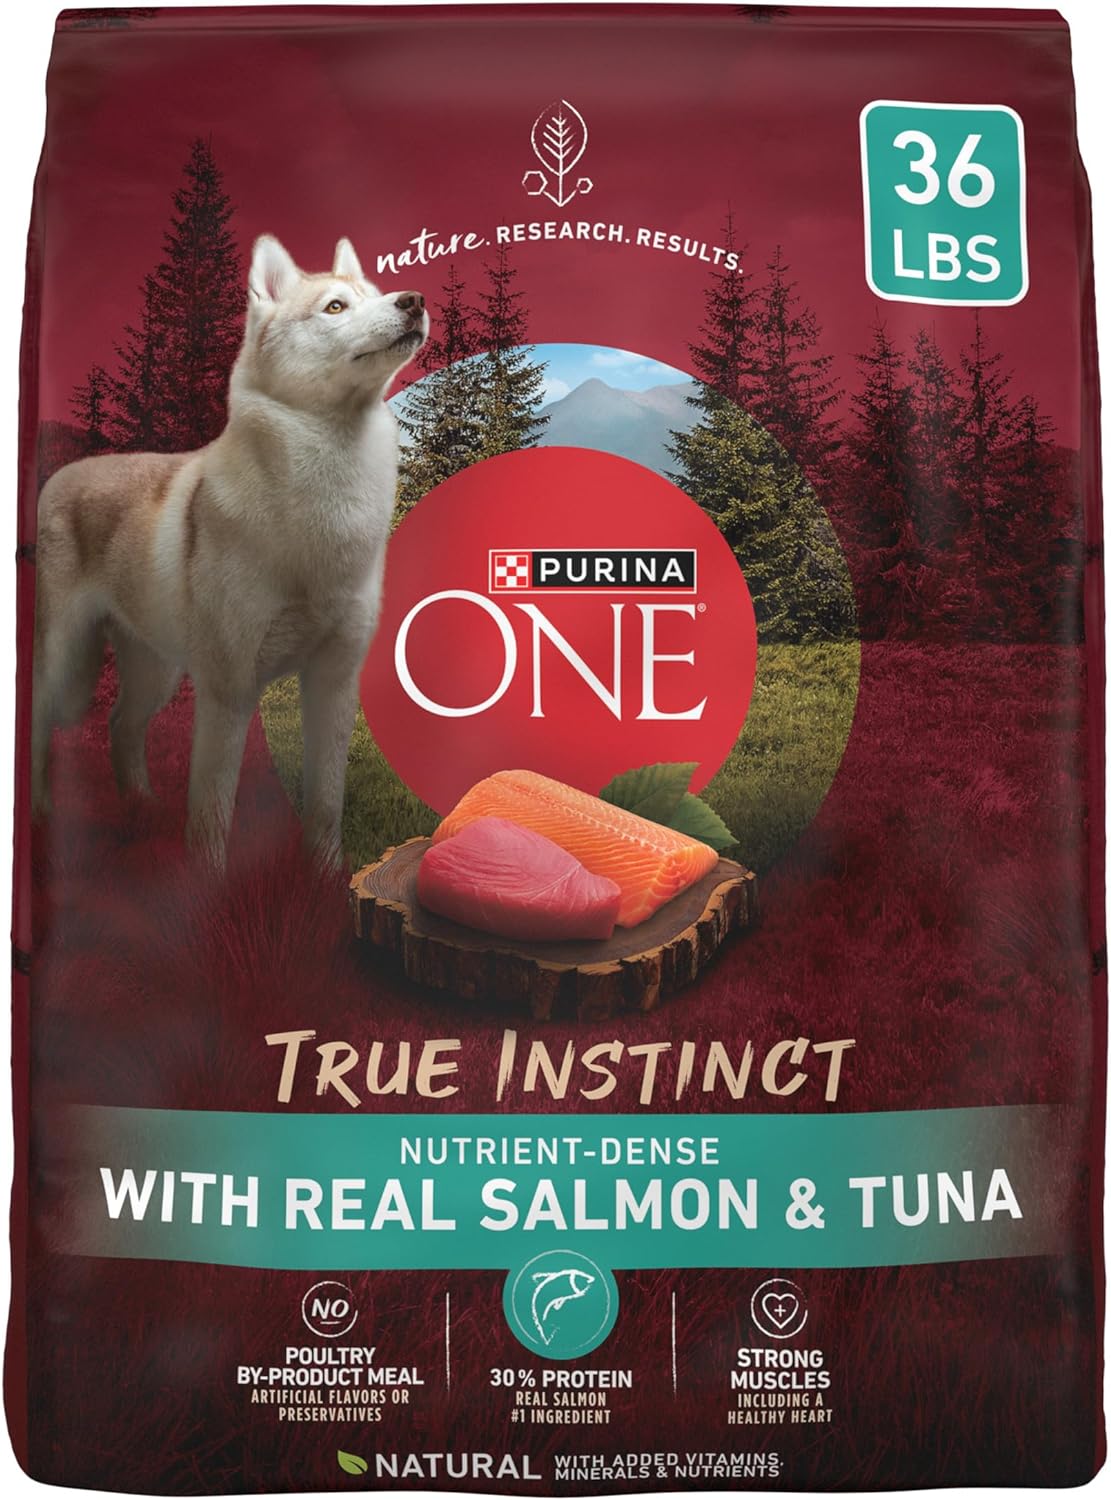 Purina ONE True Instinct with Real Salmon and Tuna Natural with Added Vitamins, Minerals and Nutrients High Protein Dog Food Dry Formula - 36 lb. Bag